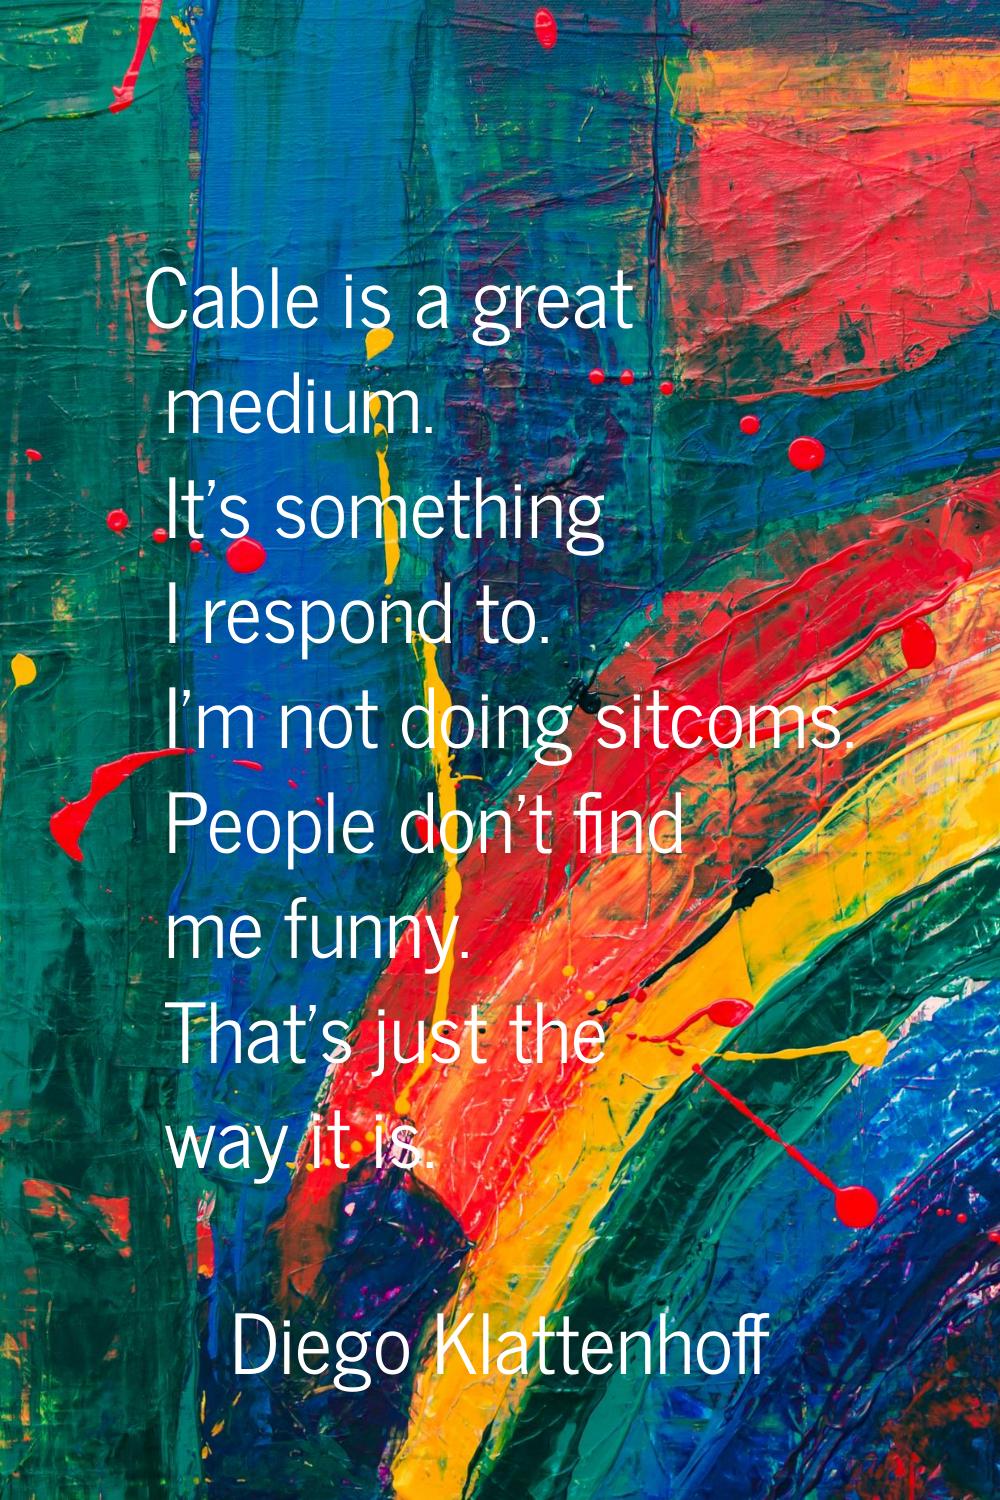 Cable is a great medium. It's something I respond to. I'm not doing sitcoms. People don't find me f